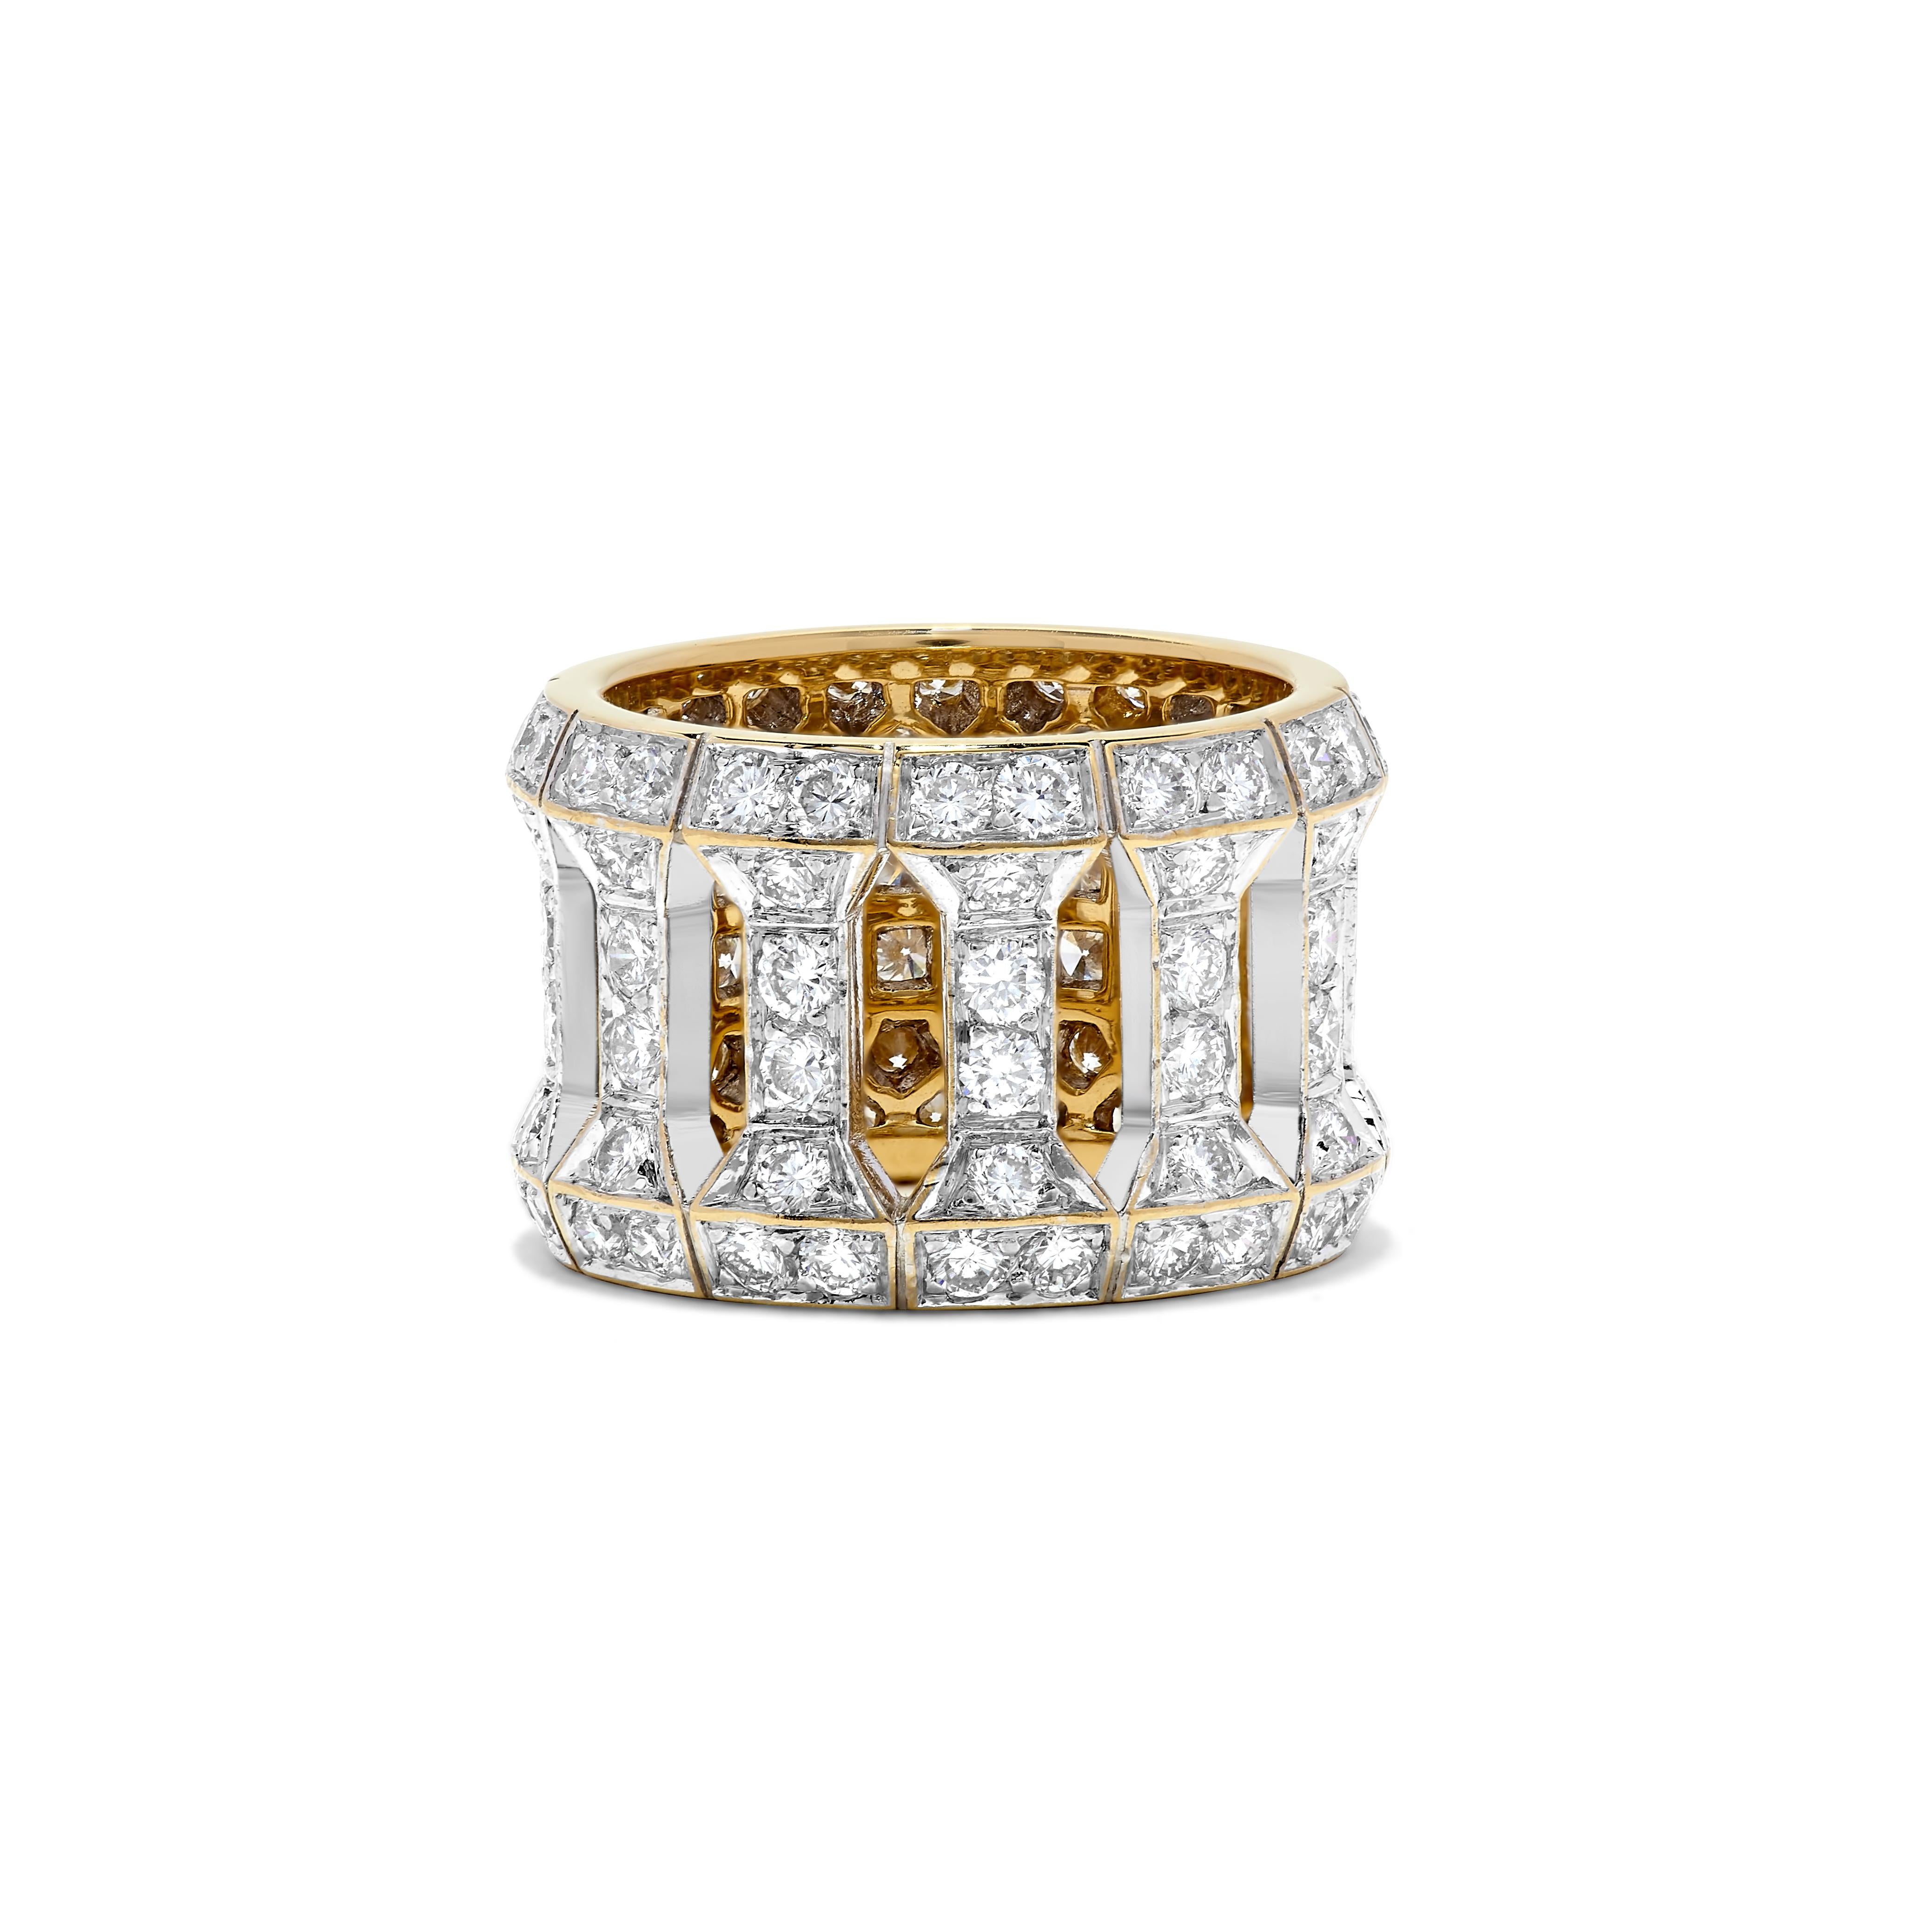 Cartier Diamond and Yellow Gold Ring